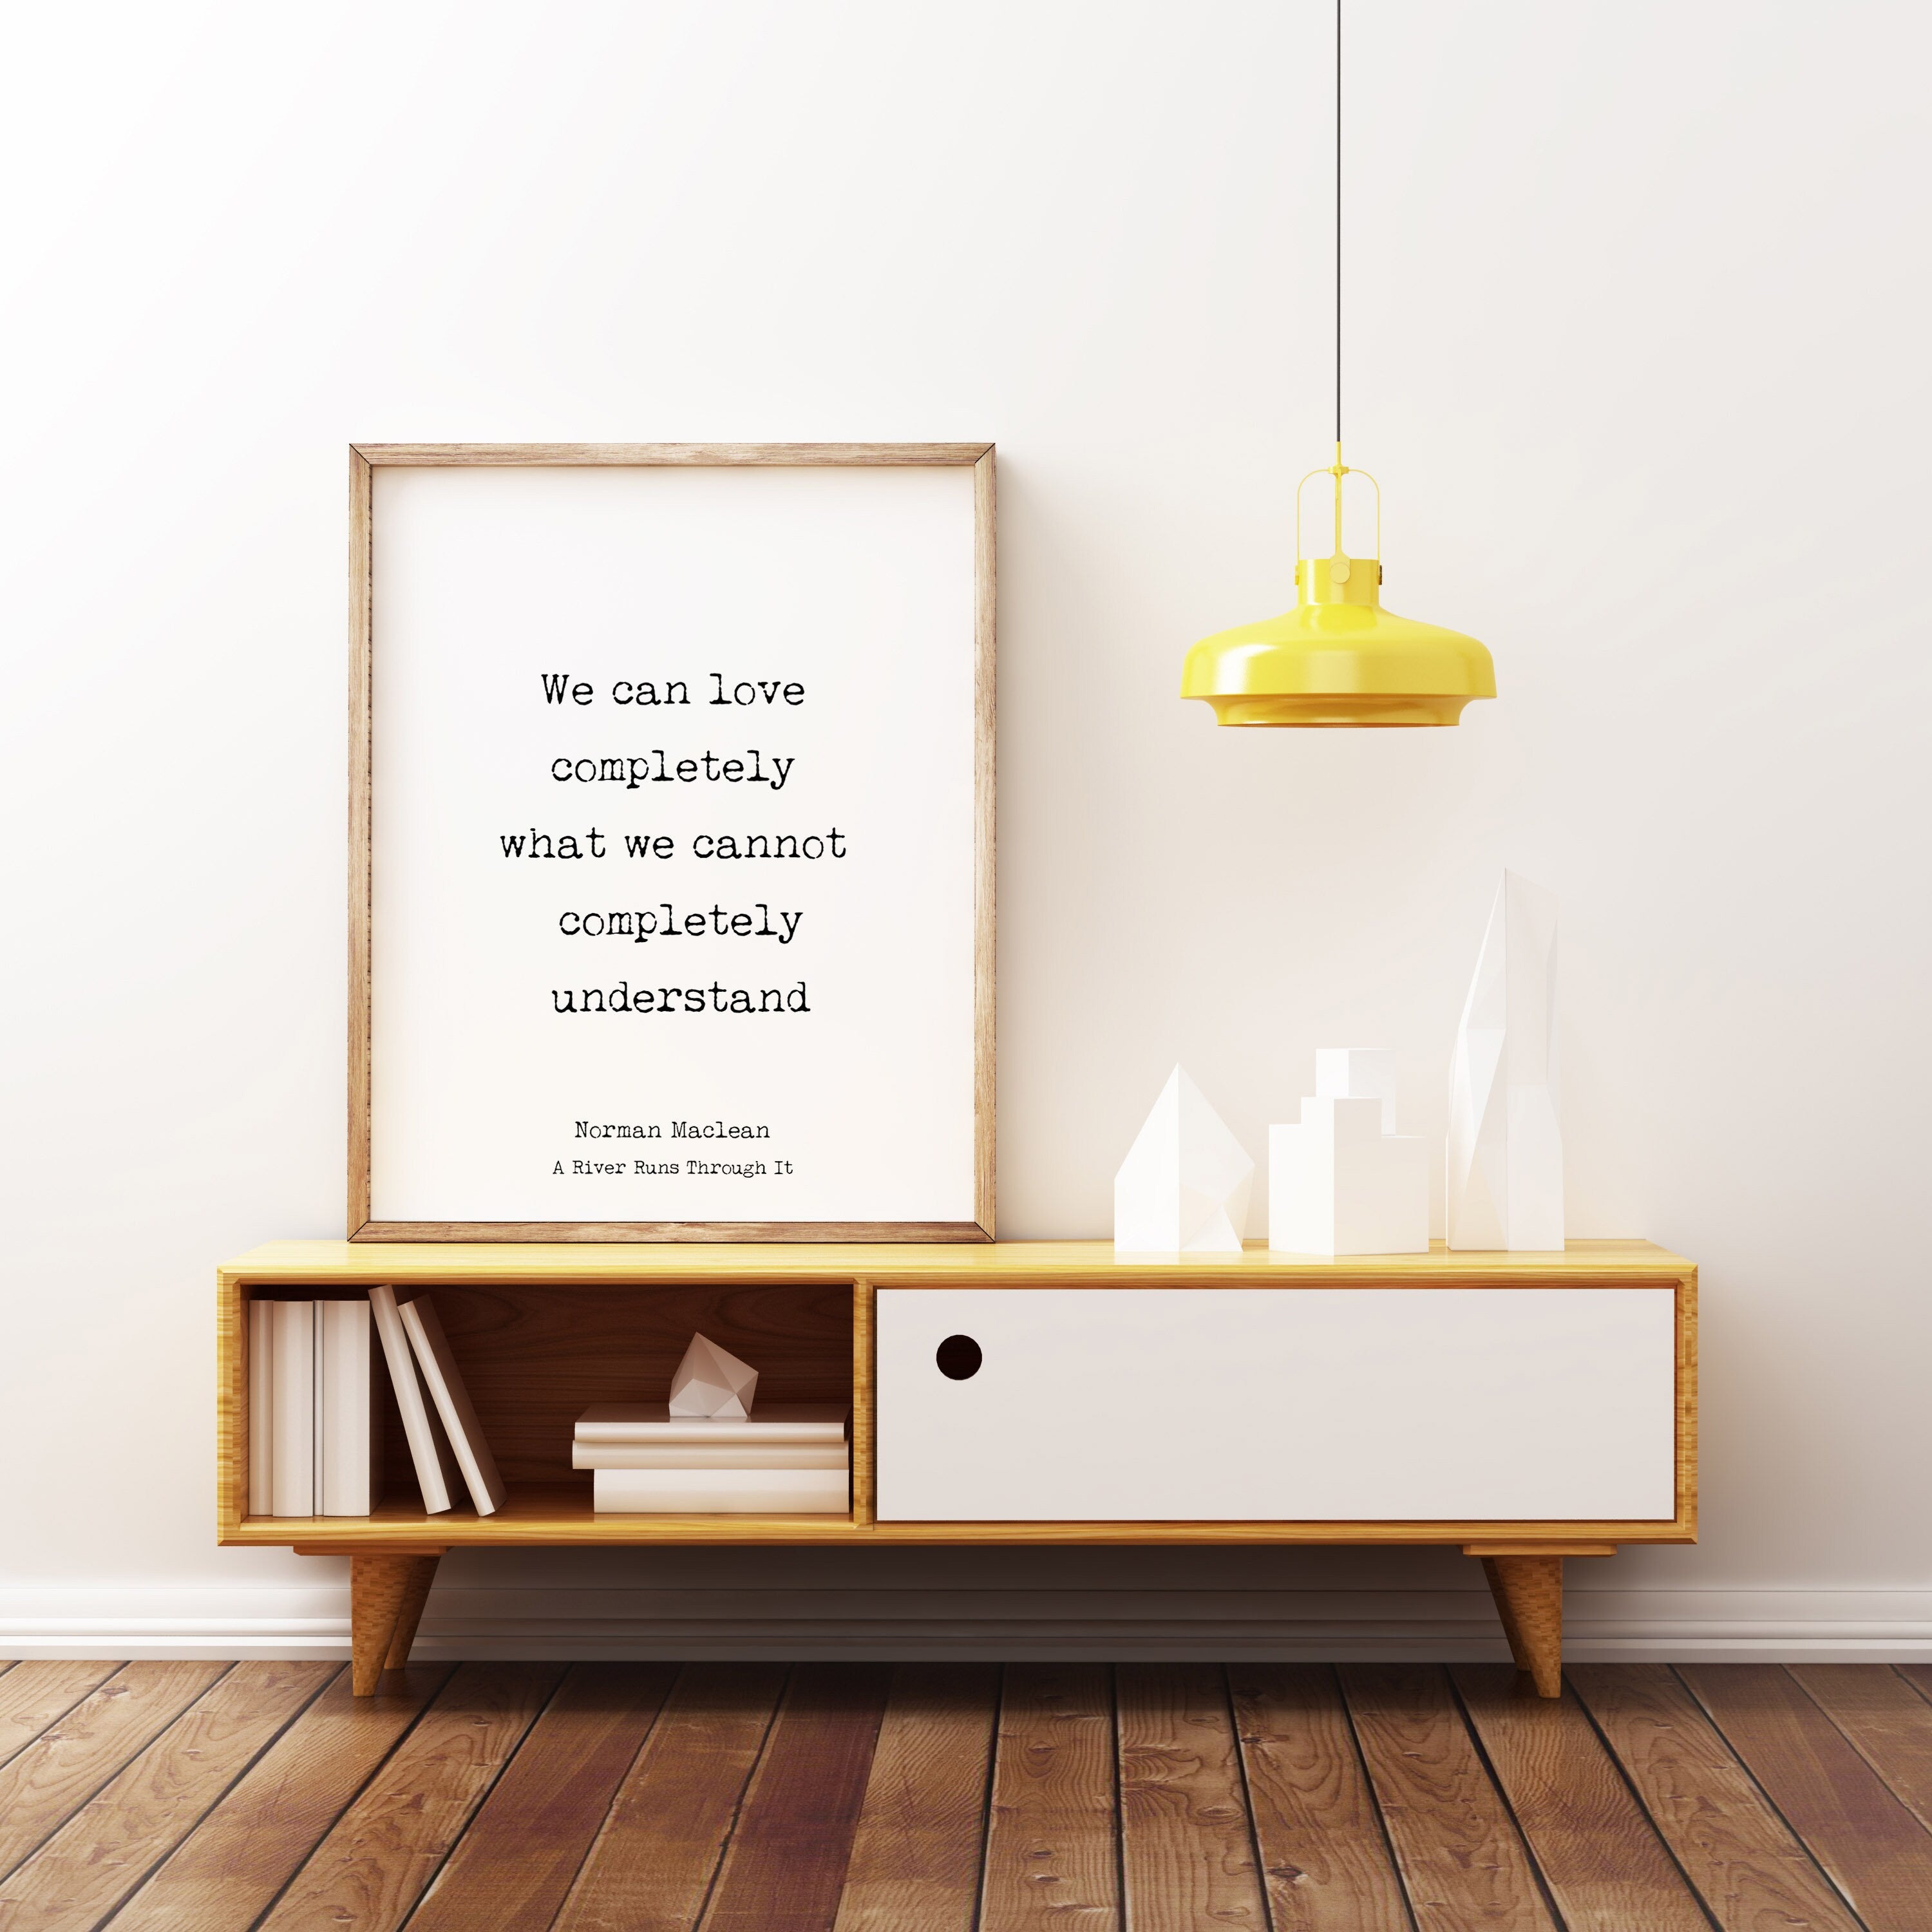 A river runs through it norman maclean quote print, we can love completely